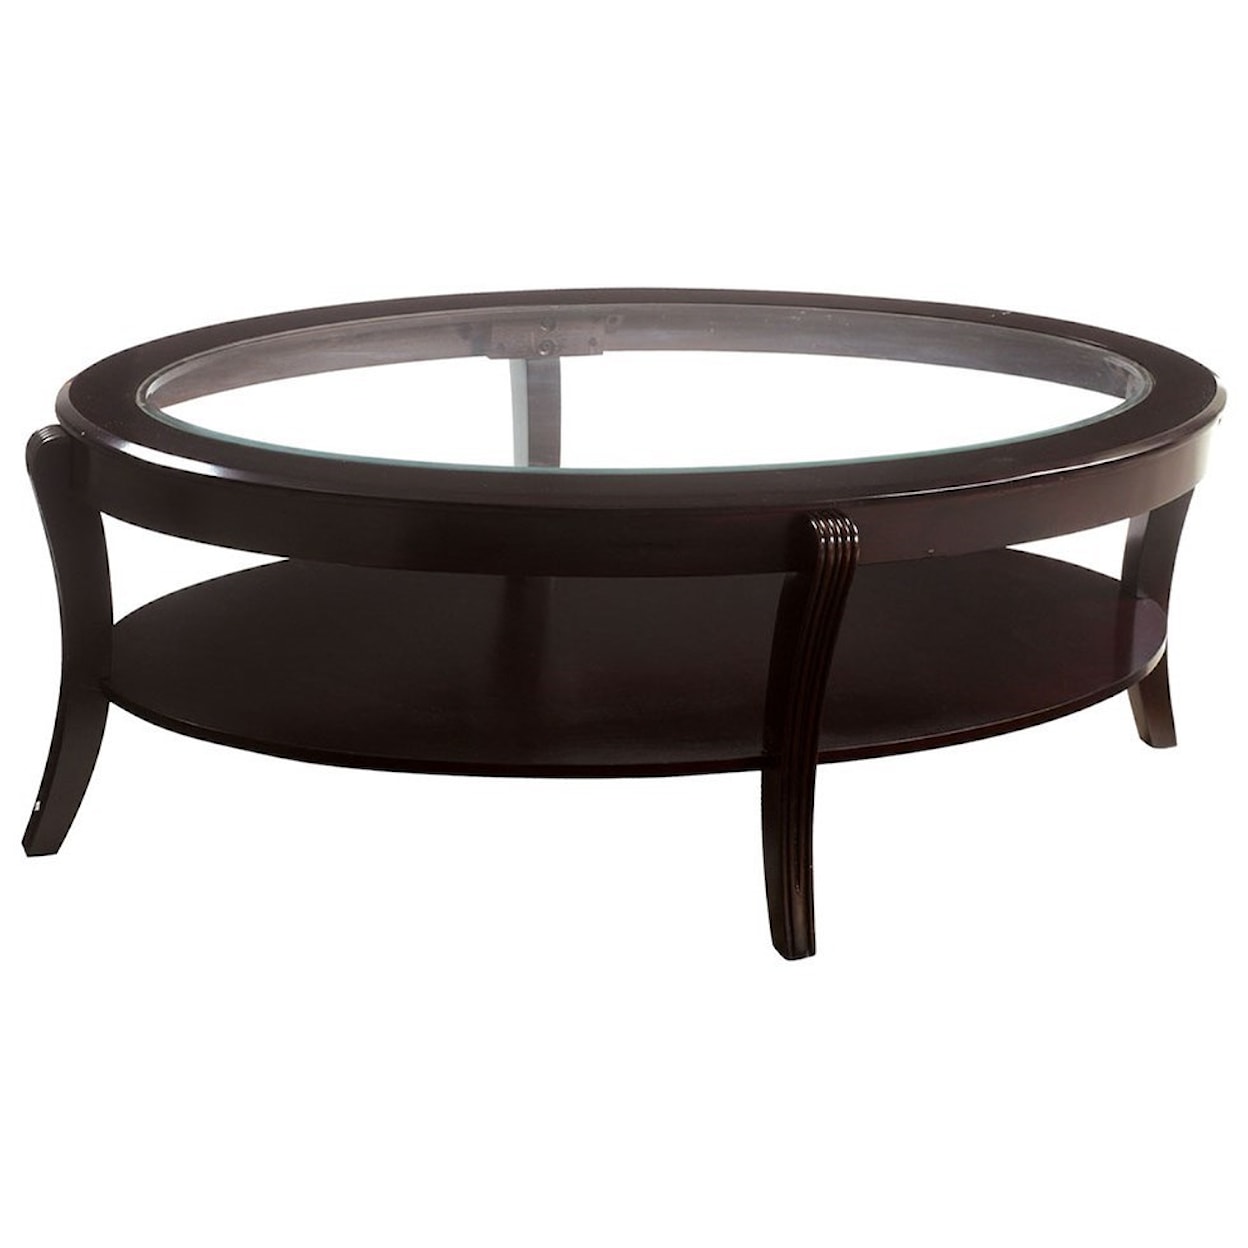 Furniture of America Finley Coffee Table